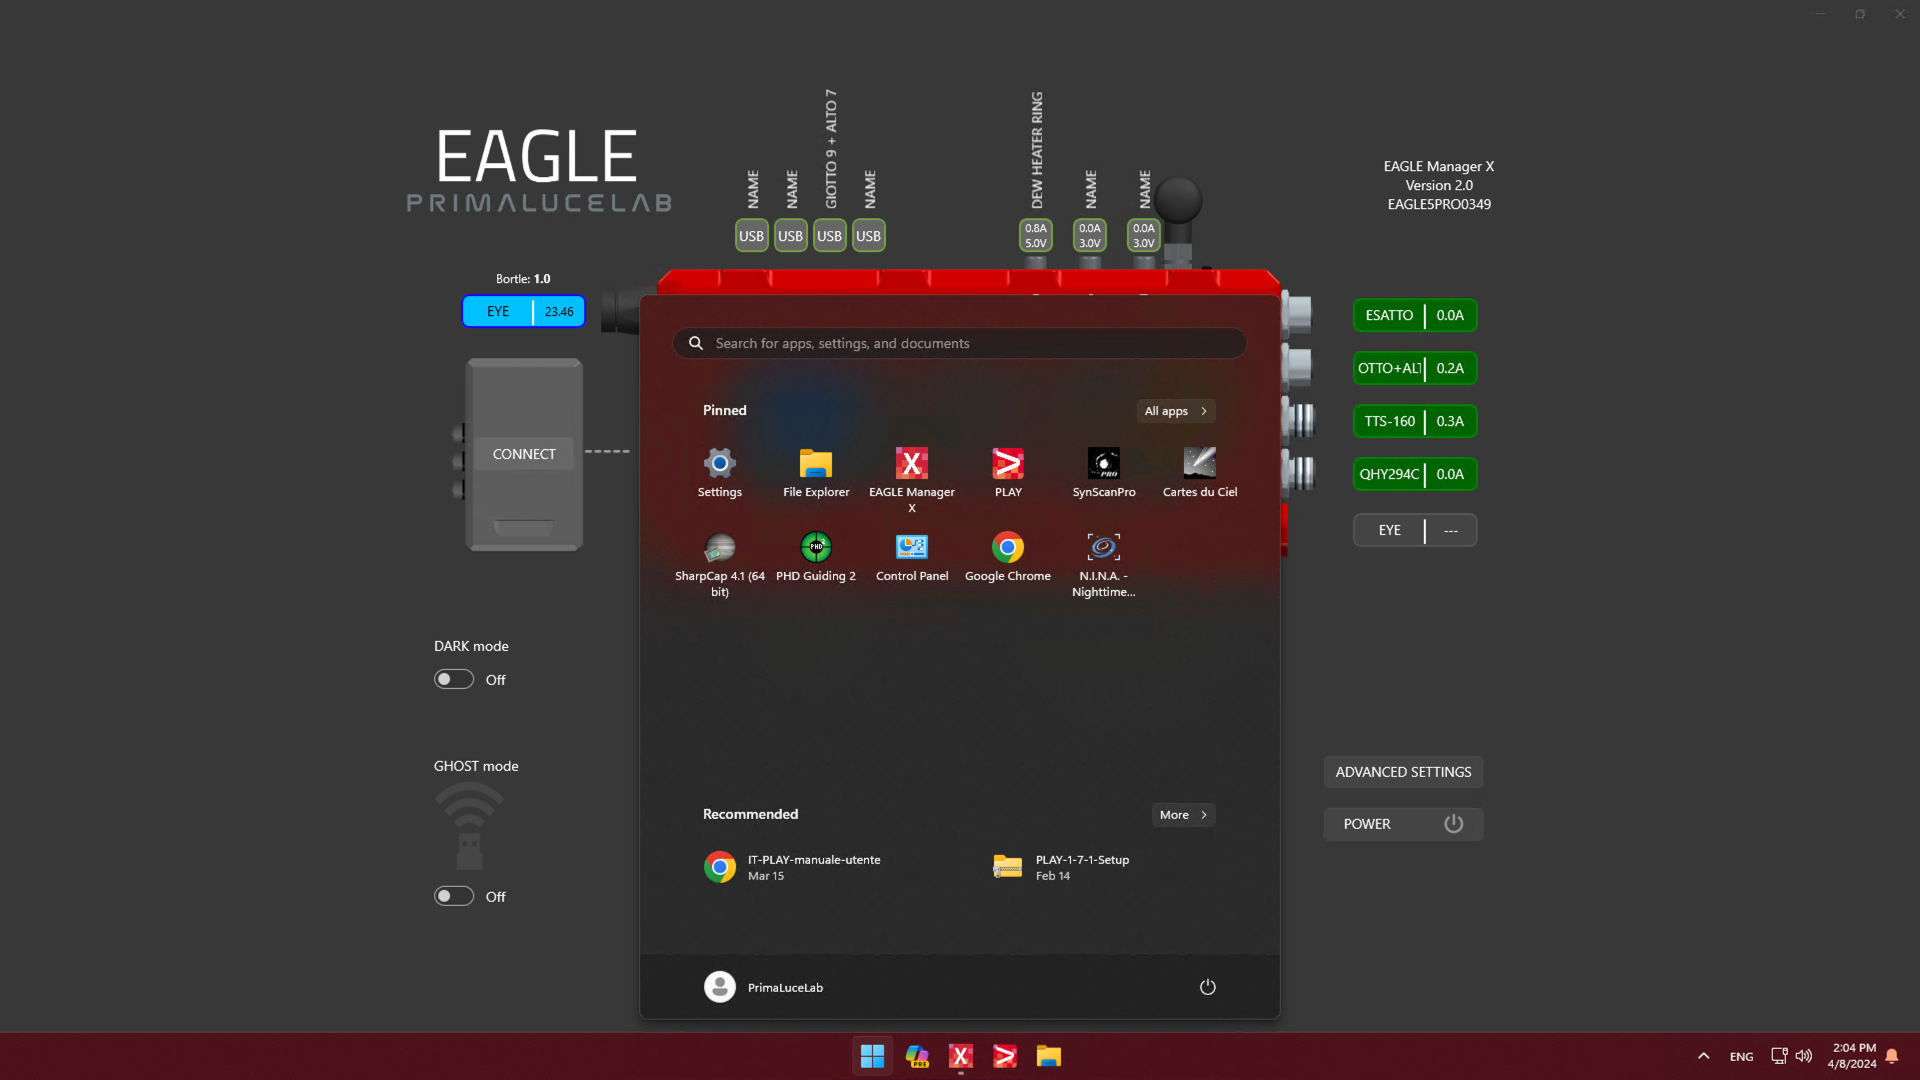 EAGLE5 S computer for telescopes and astrophotography: EAGLE5 is compatible with any astrophotography device